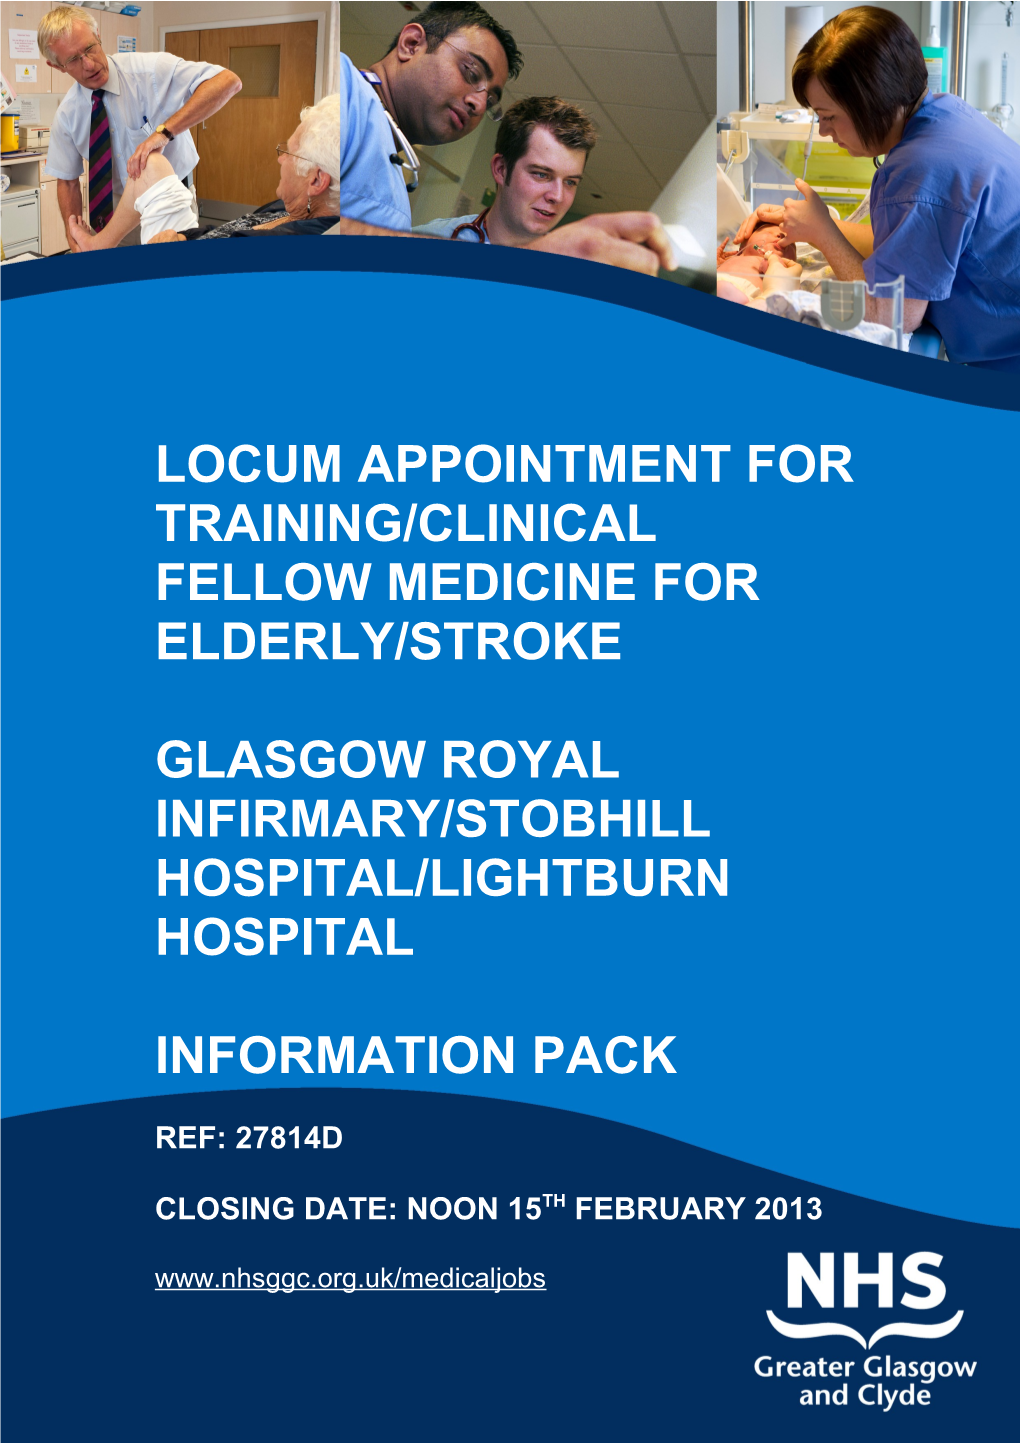 Locum Appointment for Training/Clinical Fellow Medicine for Elderly/Stroke